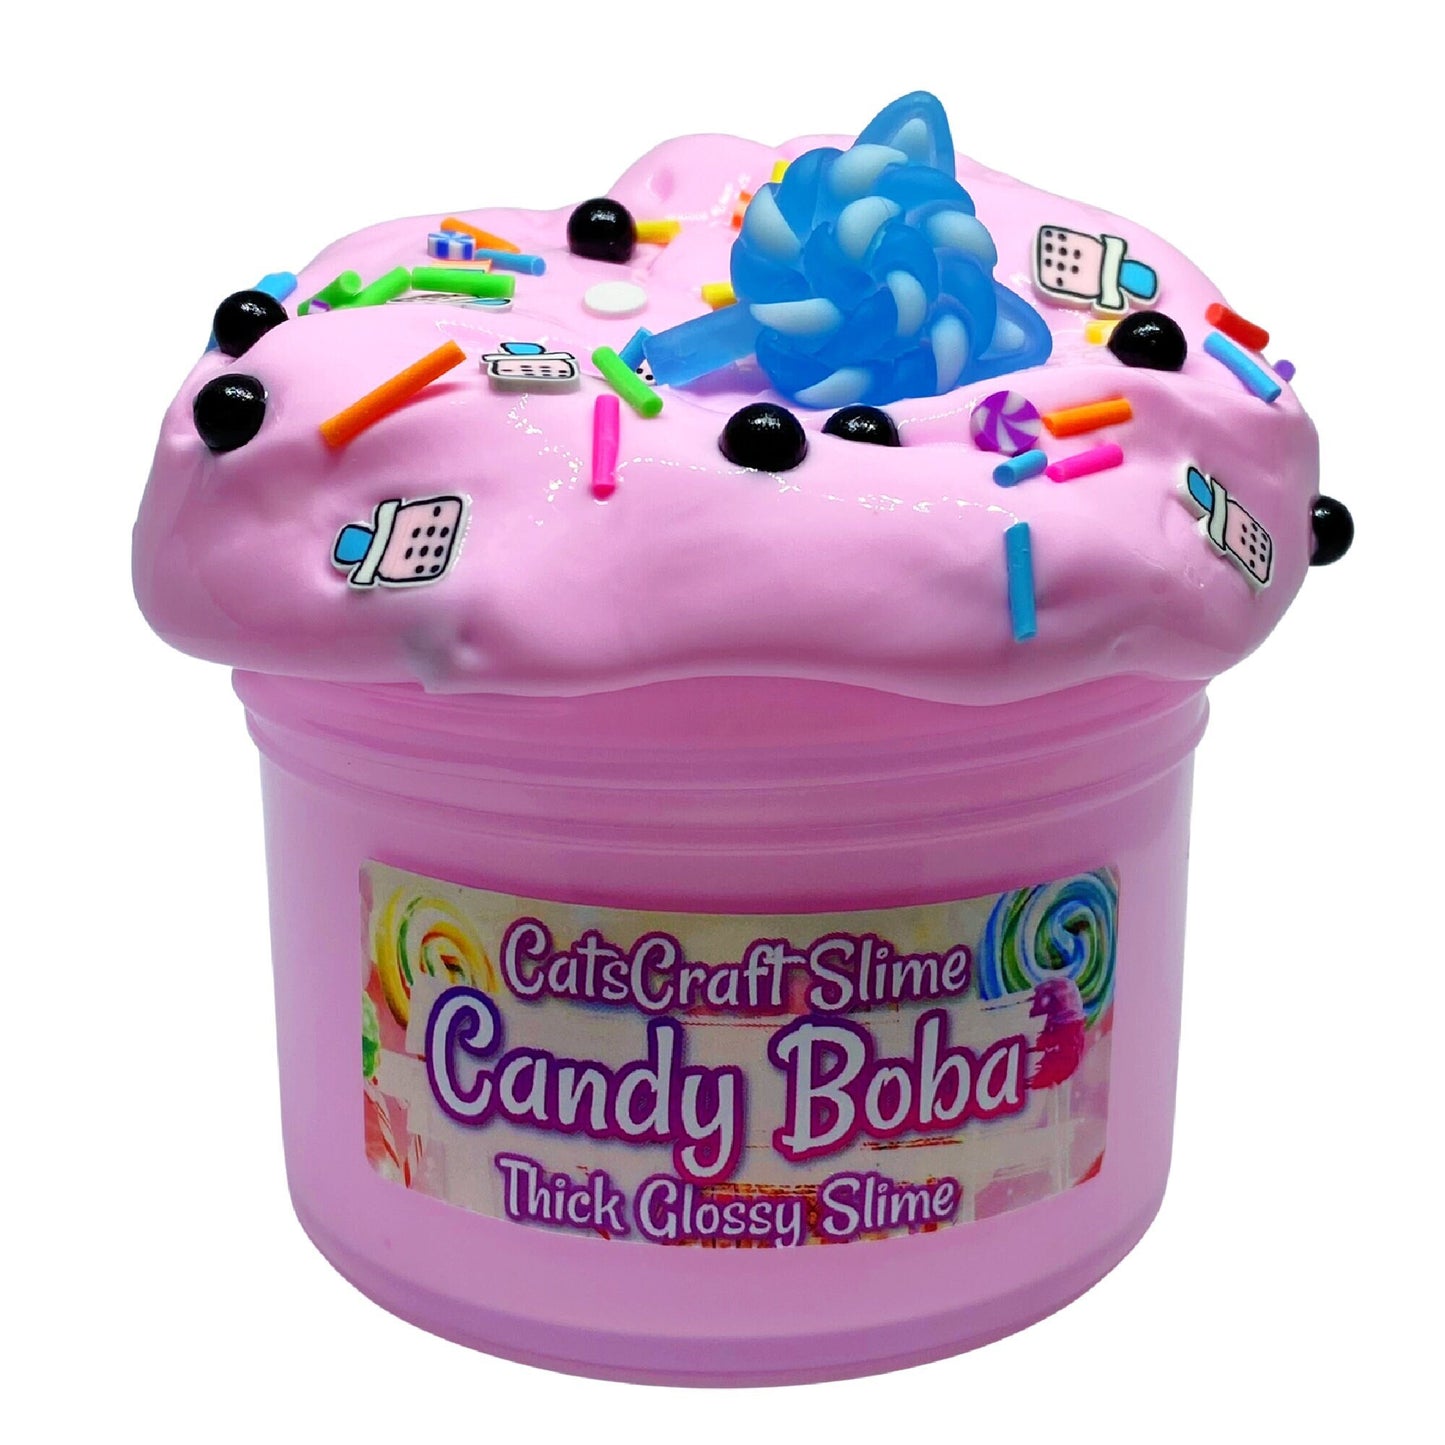 Thick Glossy Slime "Candy Boba" SCENTED ASMR Charm Fimos